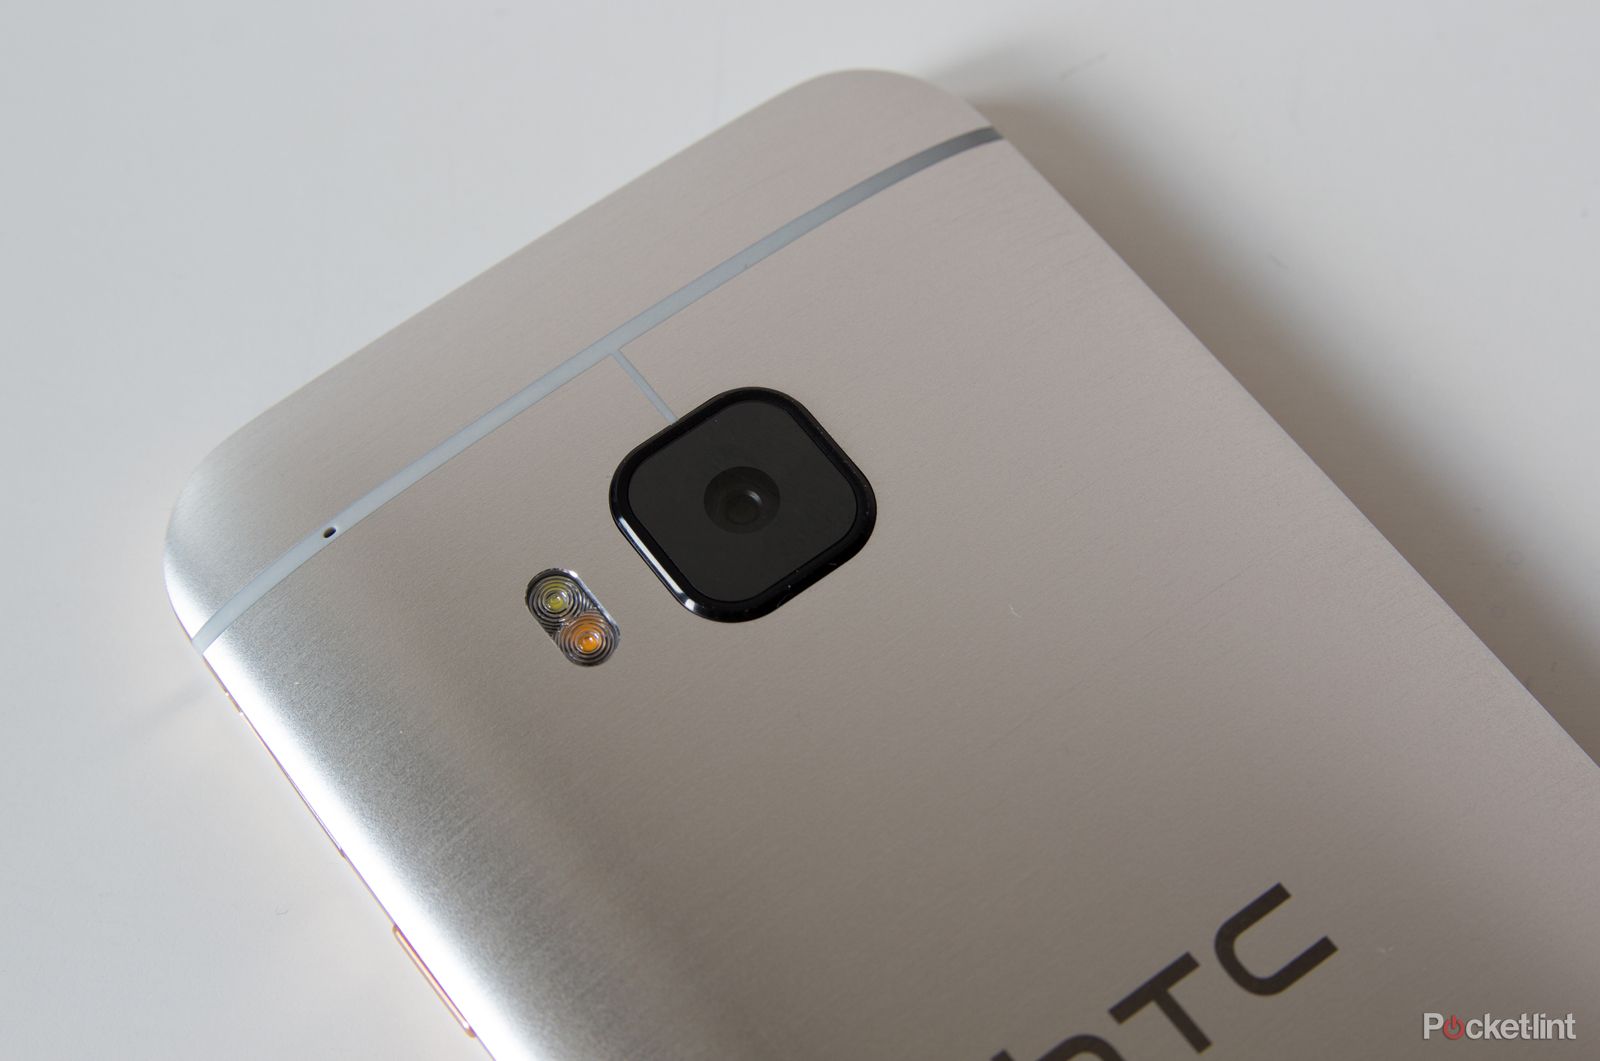 htc one a9 benchmark reveals incredible 10 core processor and 4gb ram image 1